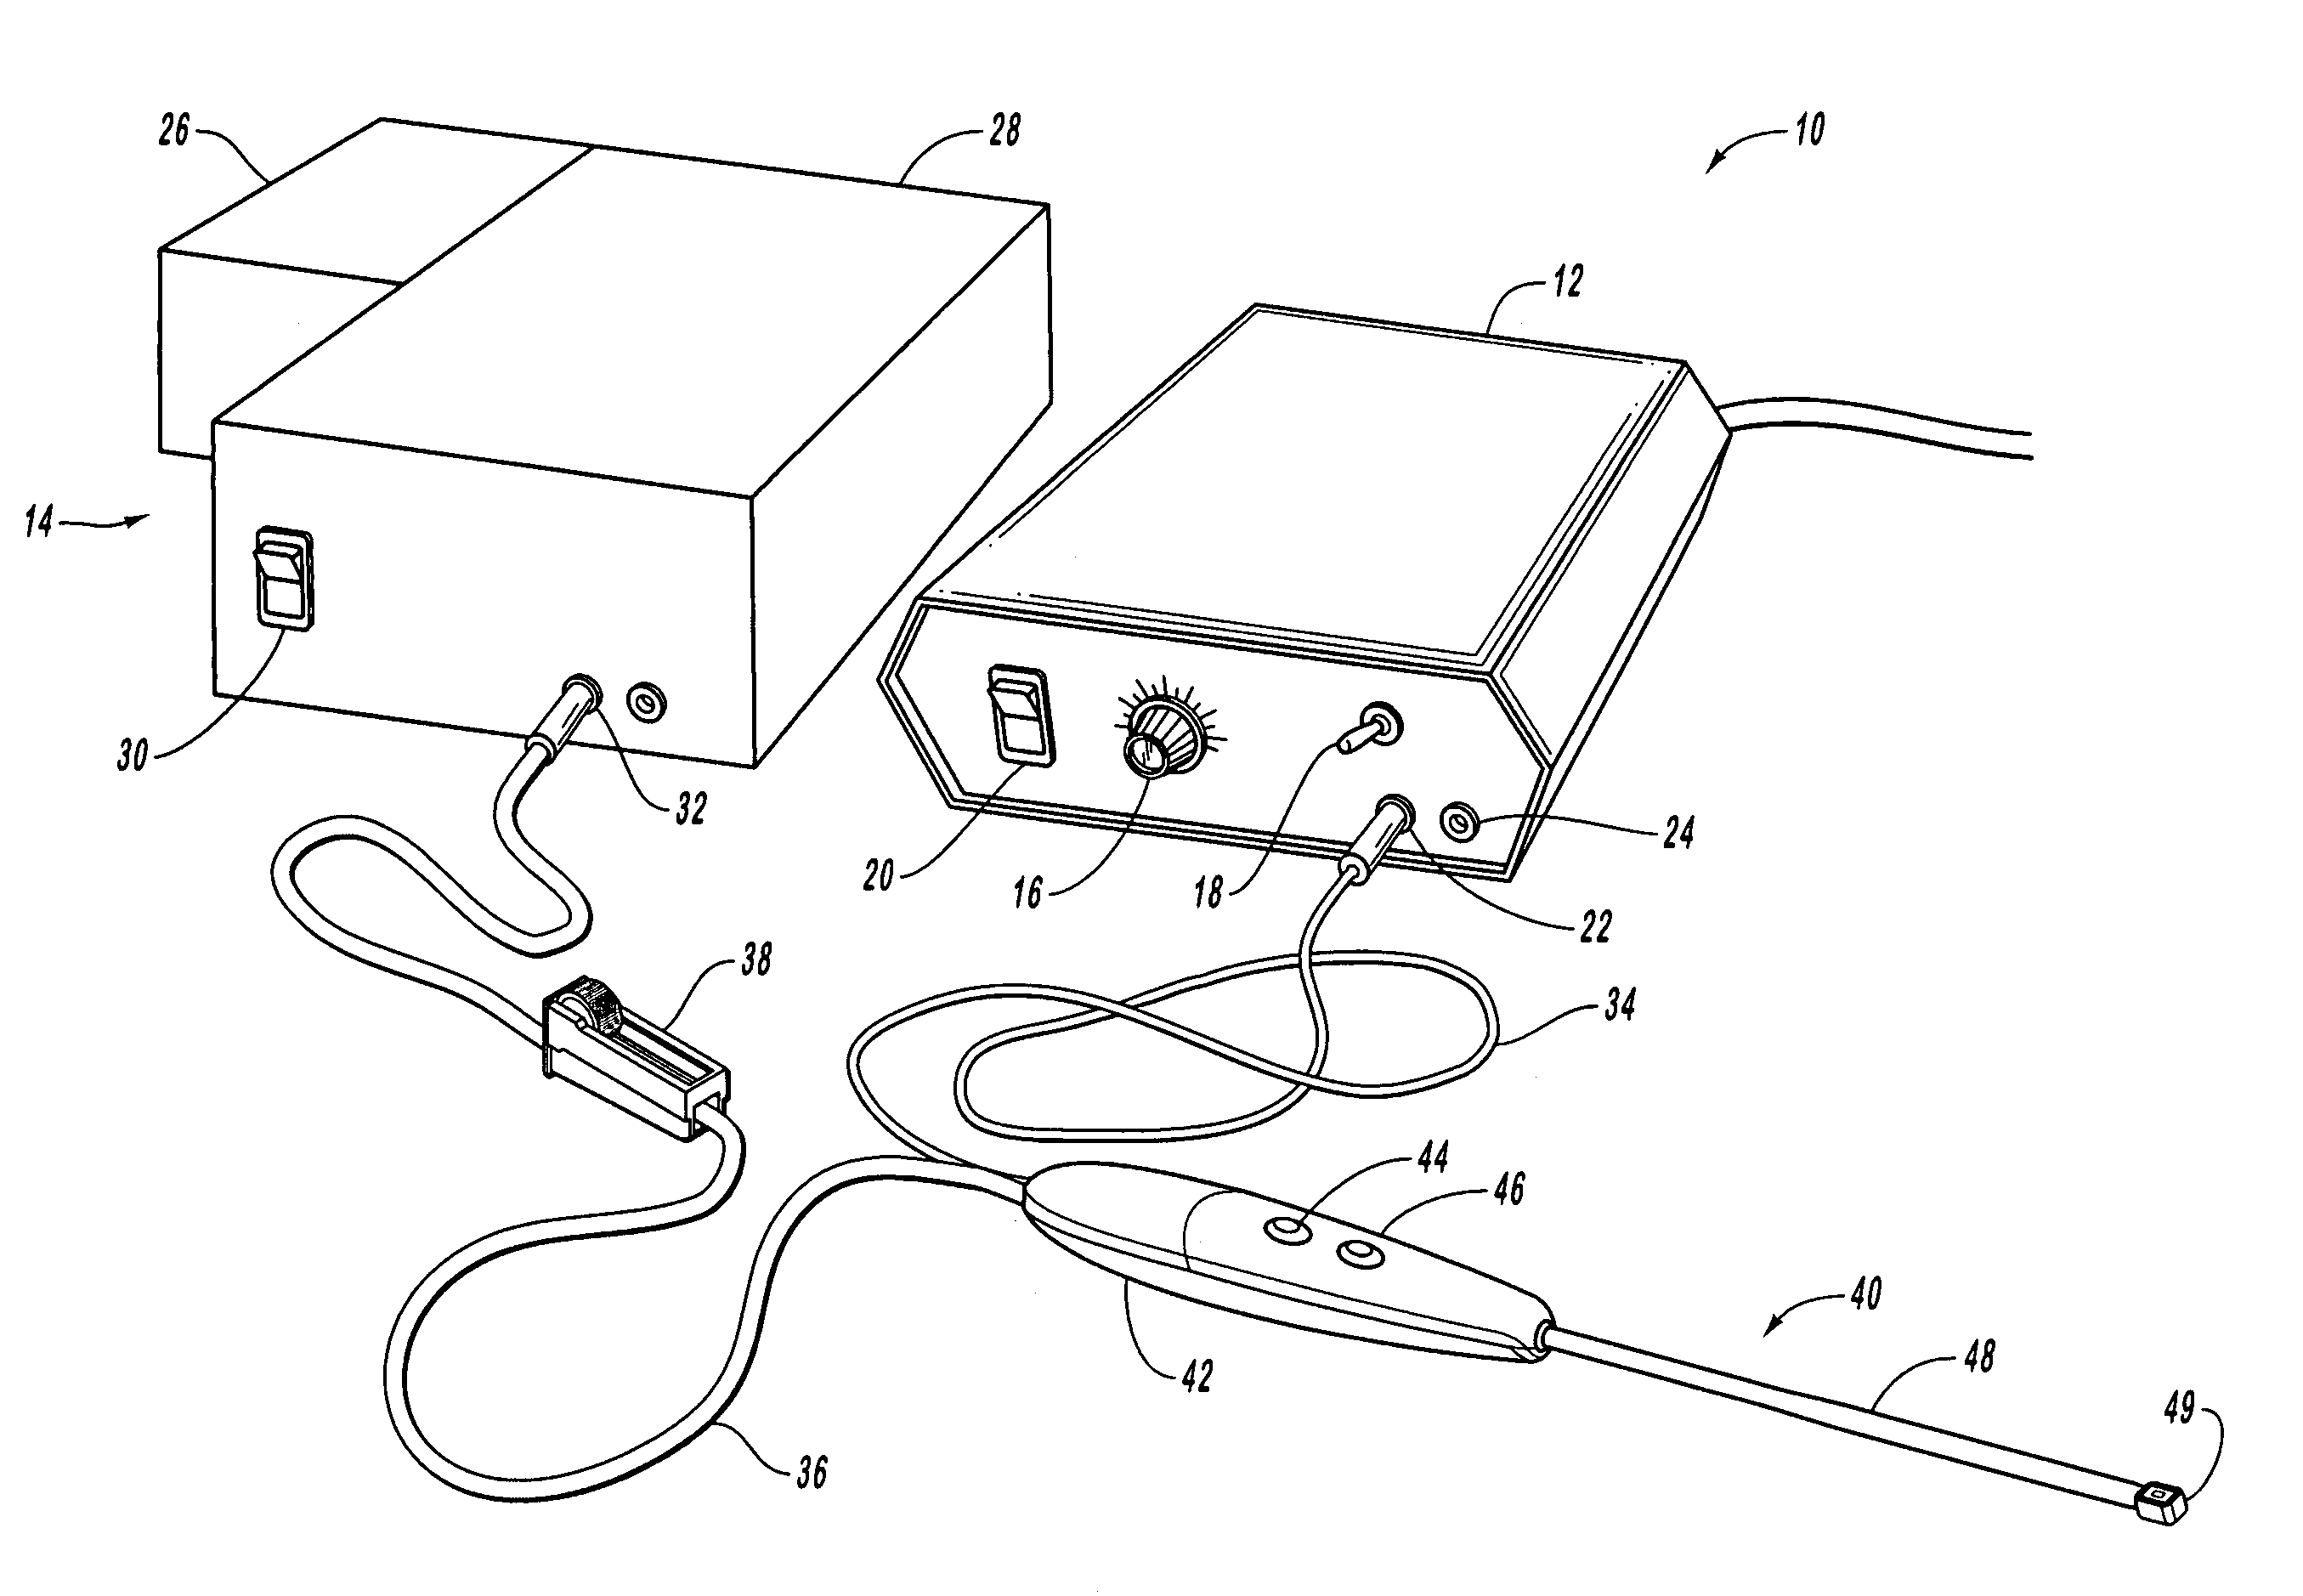 Electrosurgical instrument with an ablation mode and a coagulation mode